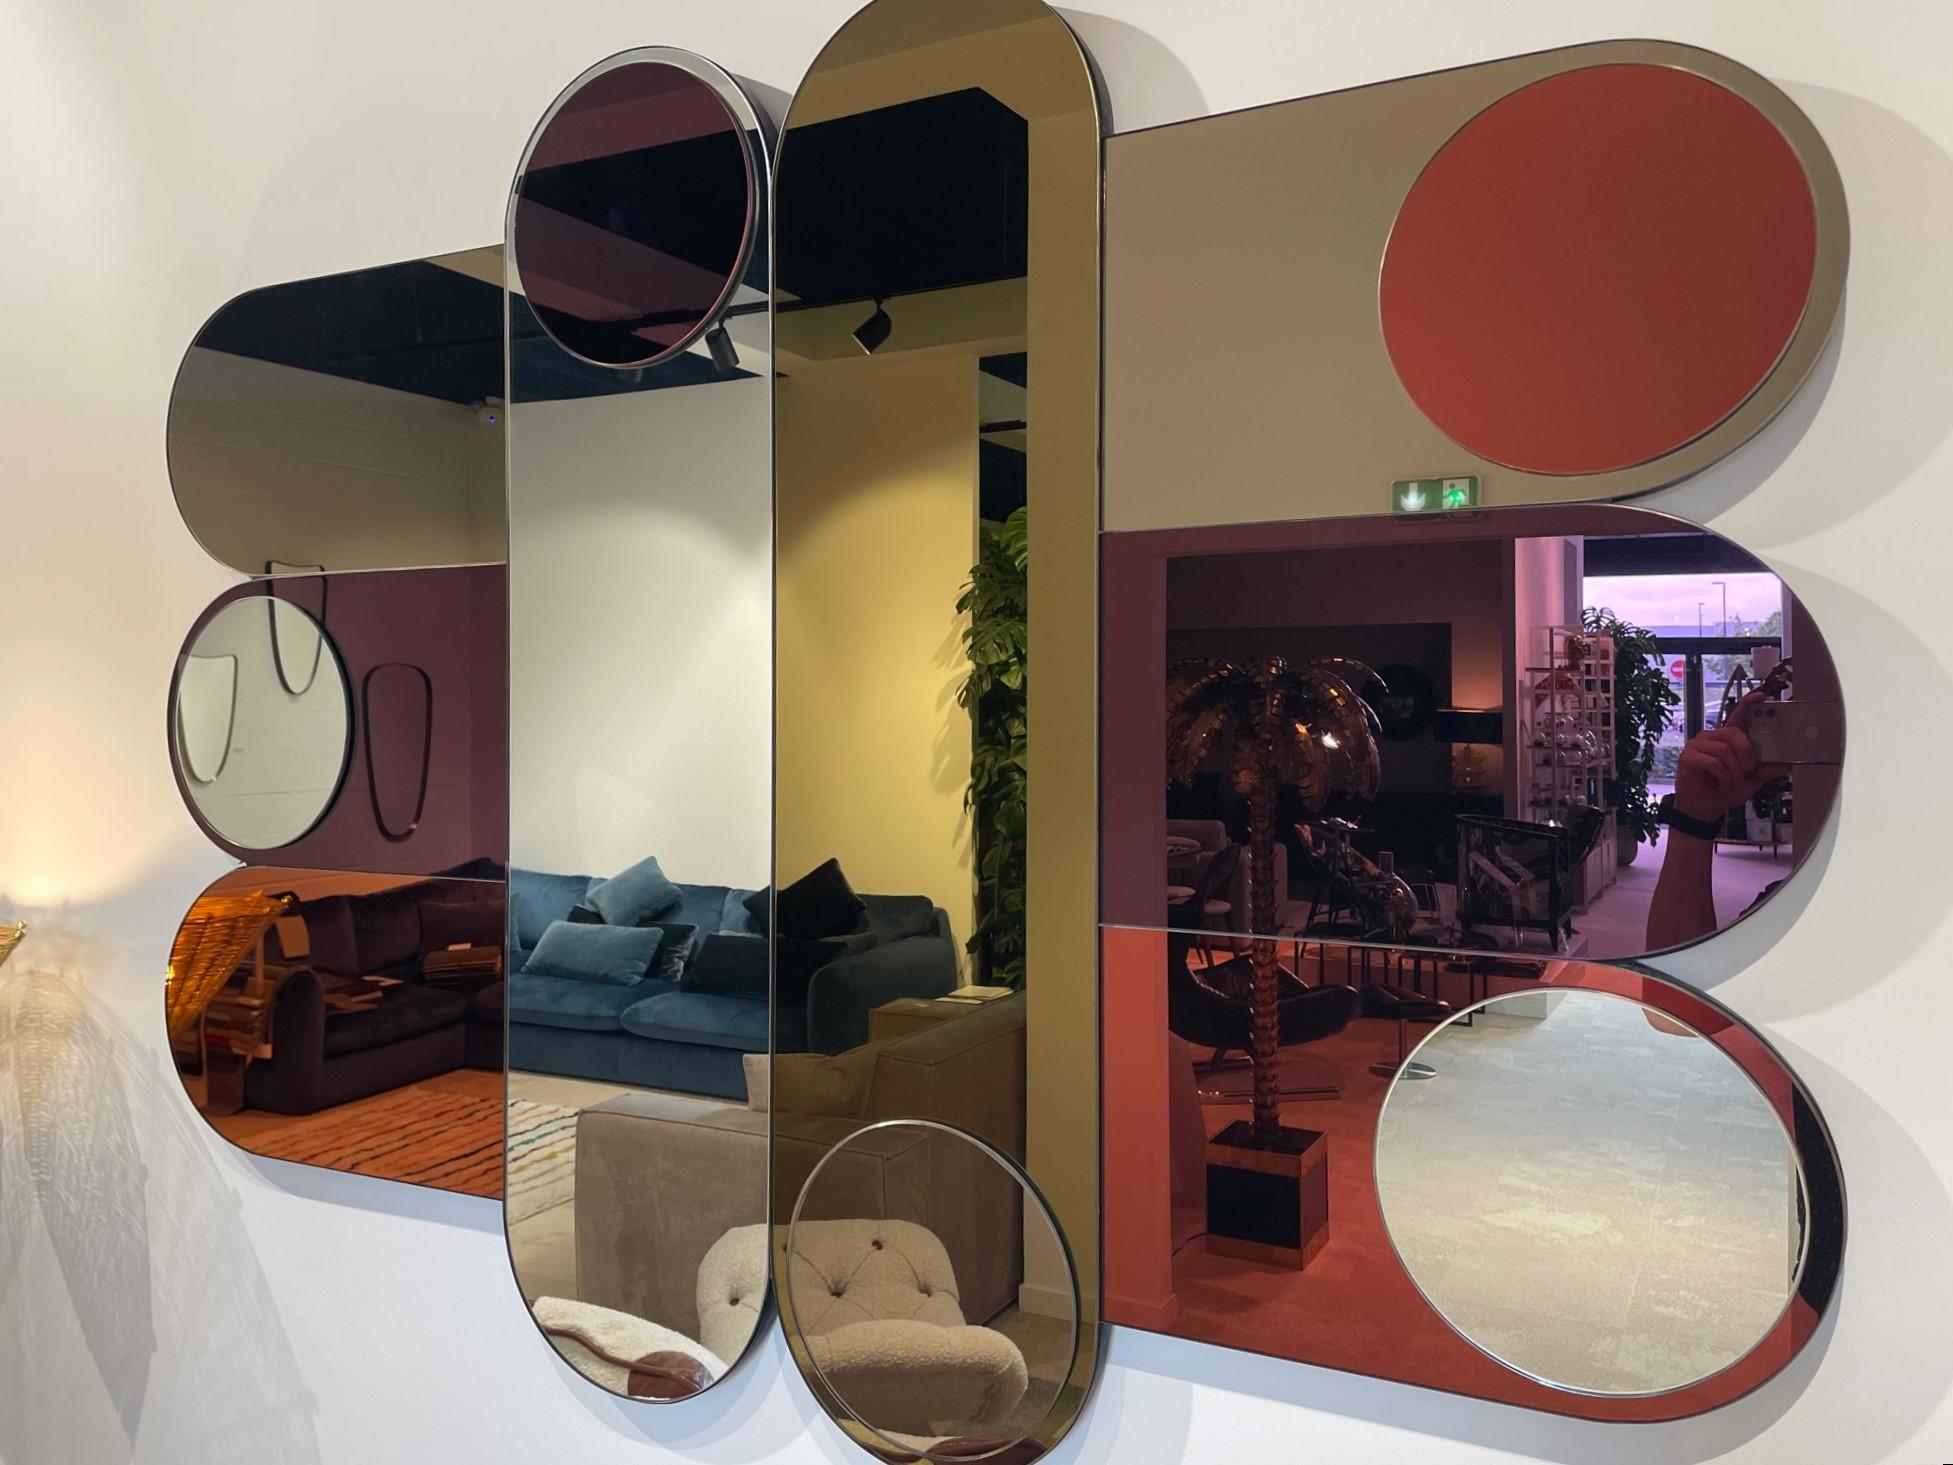 1960s 1970s Italian Design Style Large Colored Graphic Mirror composed of an curved and round structure adorned with several mirrors in different colors like purple, pink, orange, silver and gold. The built-in fasteners are designed so that you can